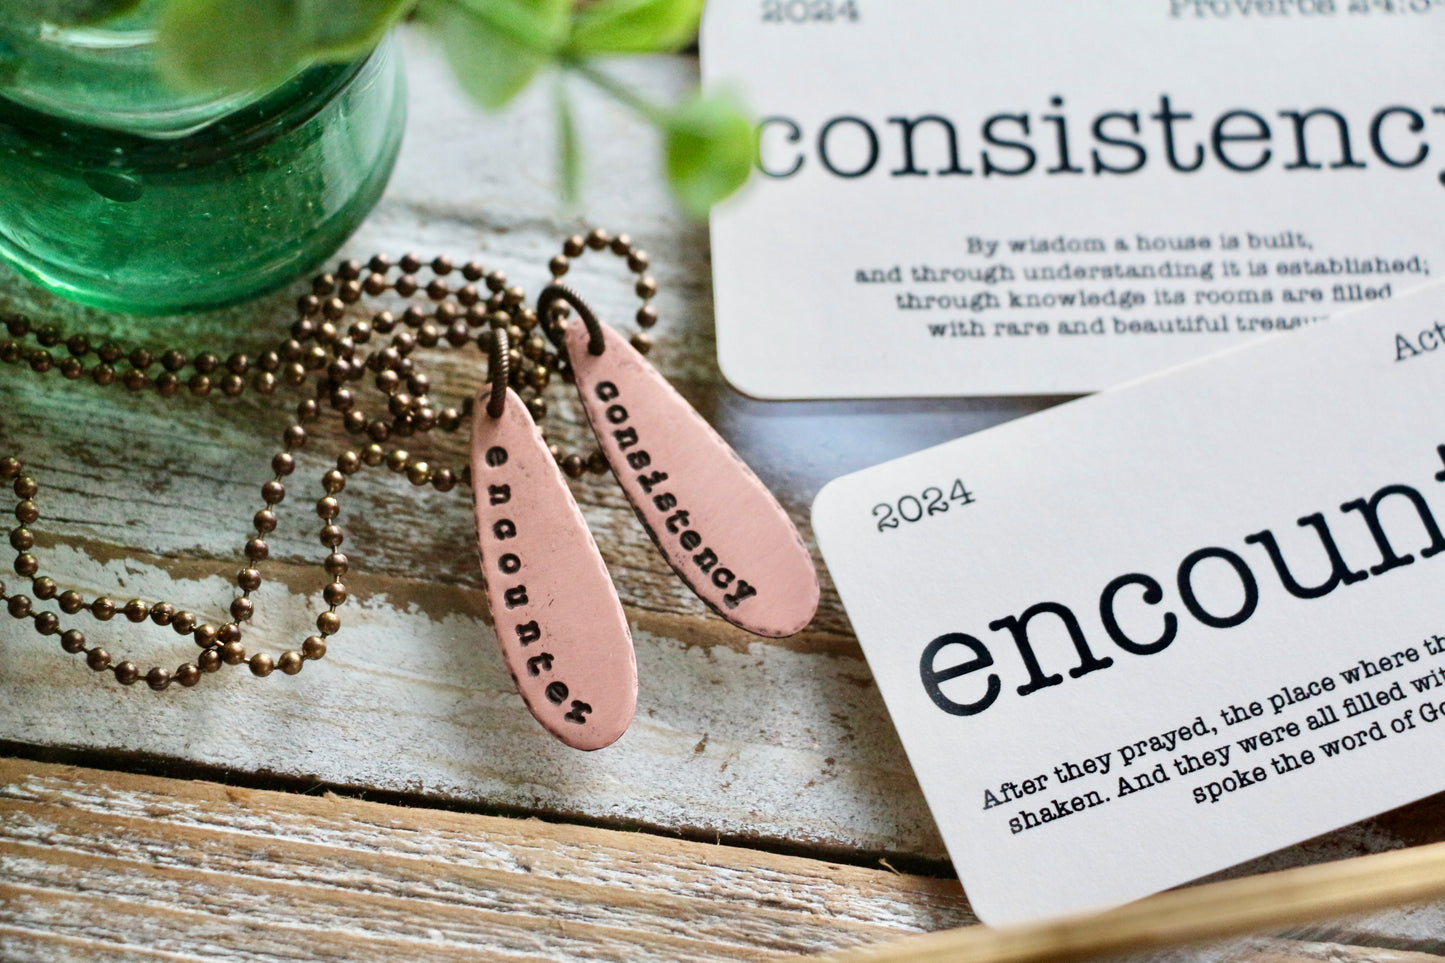 LONG TEARDROP custom OLW hand-stamped copper necklace with mini flashcard